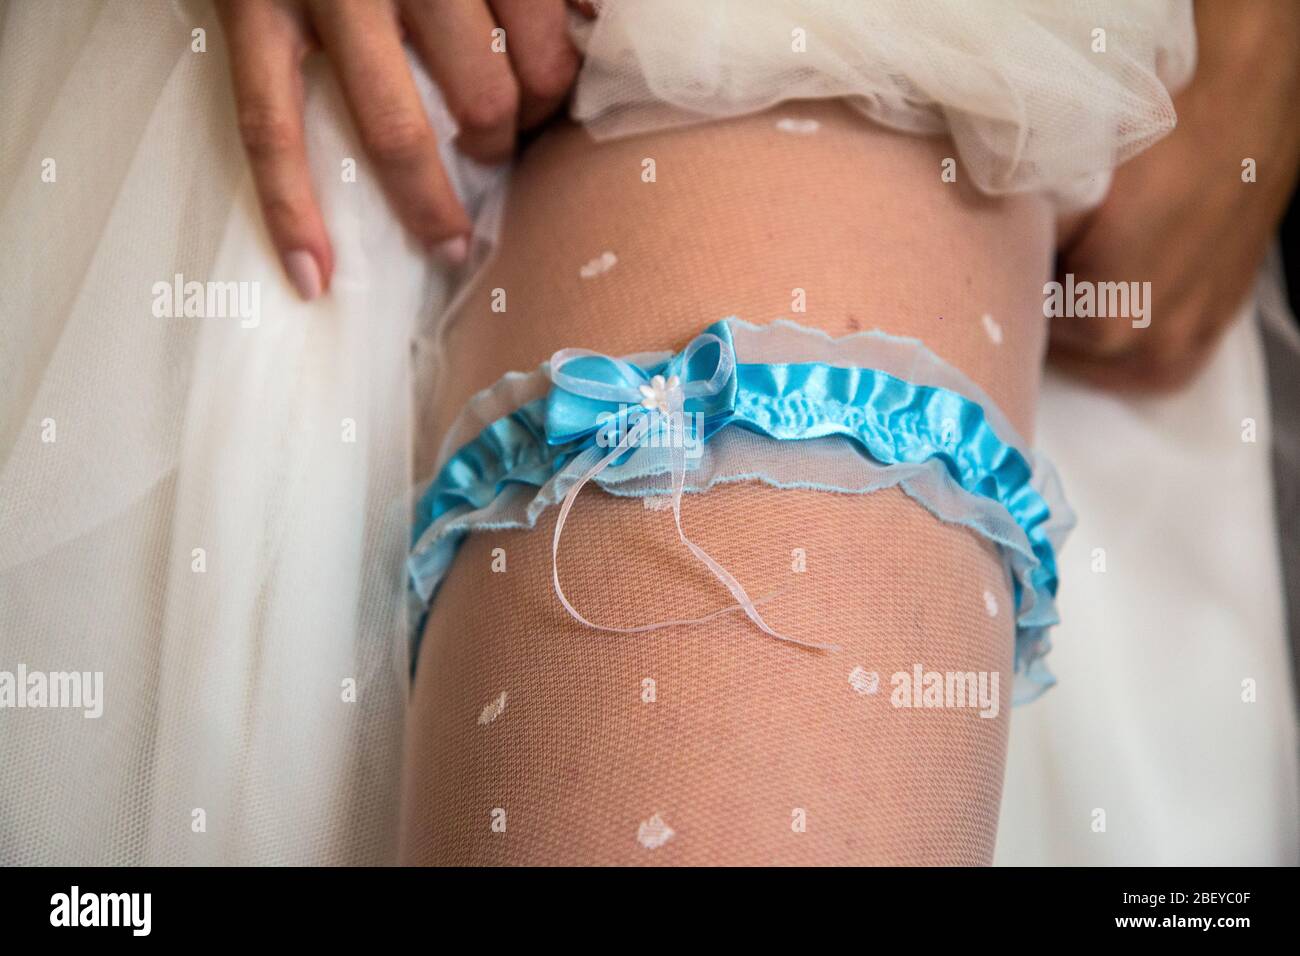 The detail of the leg of a bride. She wears the traditional wedding garter under her wedding dress. Stock Photo